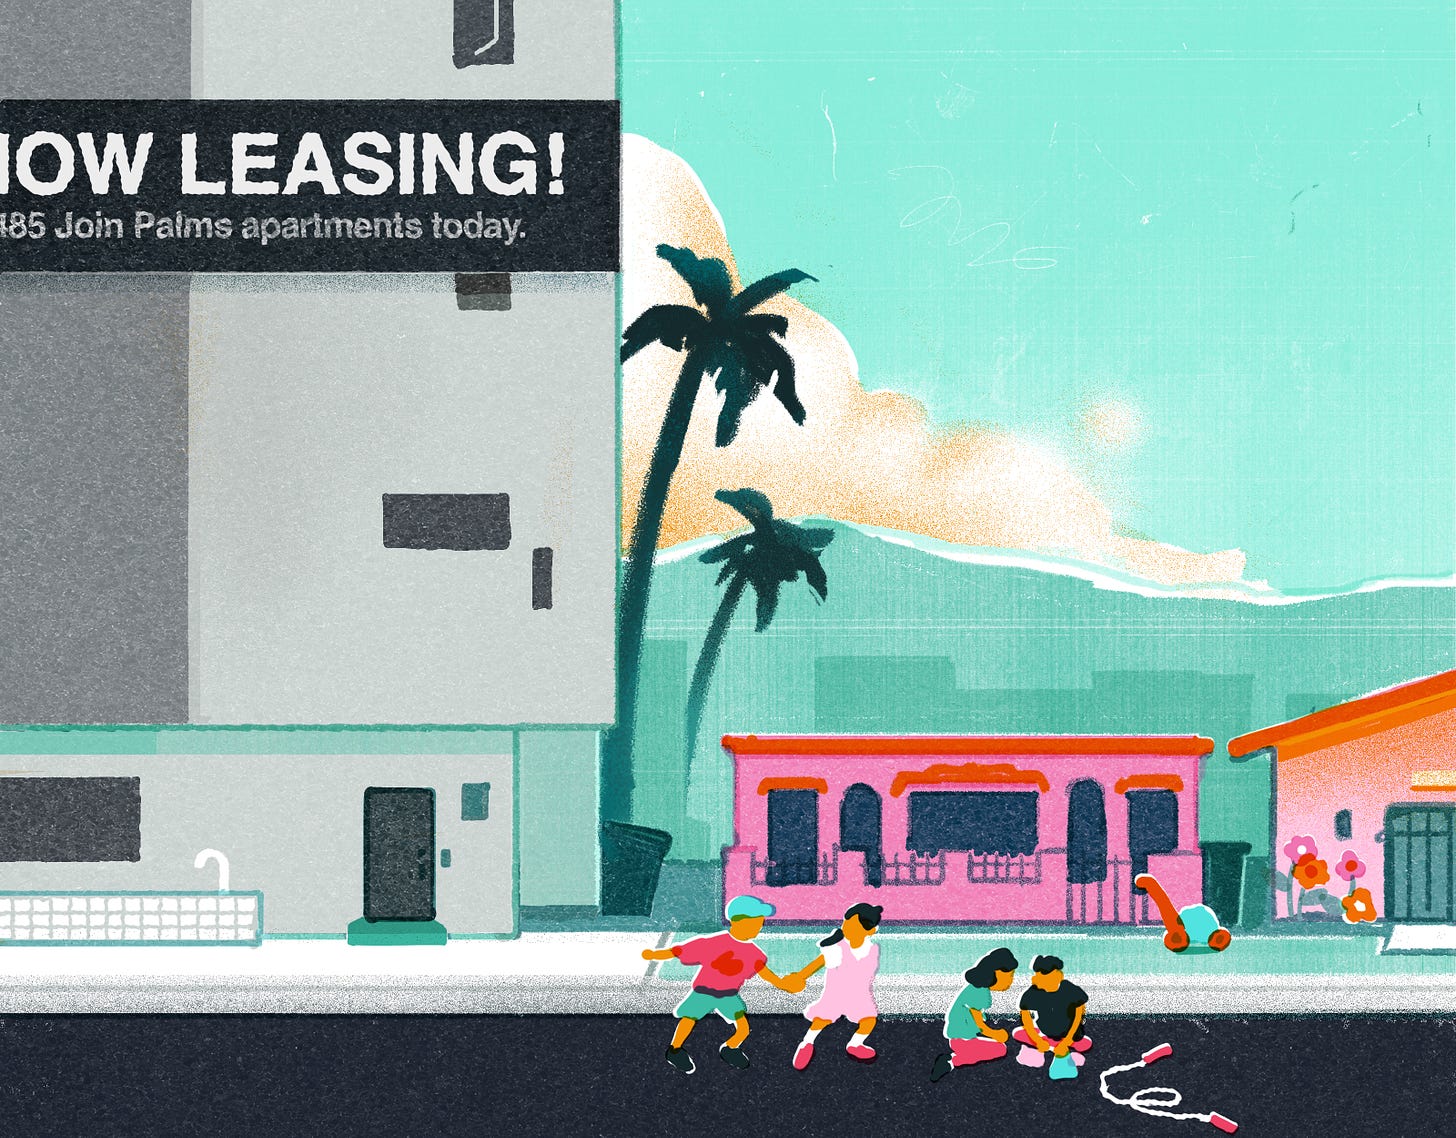 A large black and gray building with no plant life that takes up half the frame and bears a Now Leasing sign looms over smaller, more colorful buildings. Kids play in the street in front of the smaller homes. 